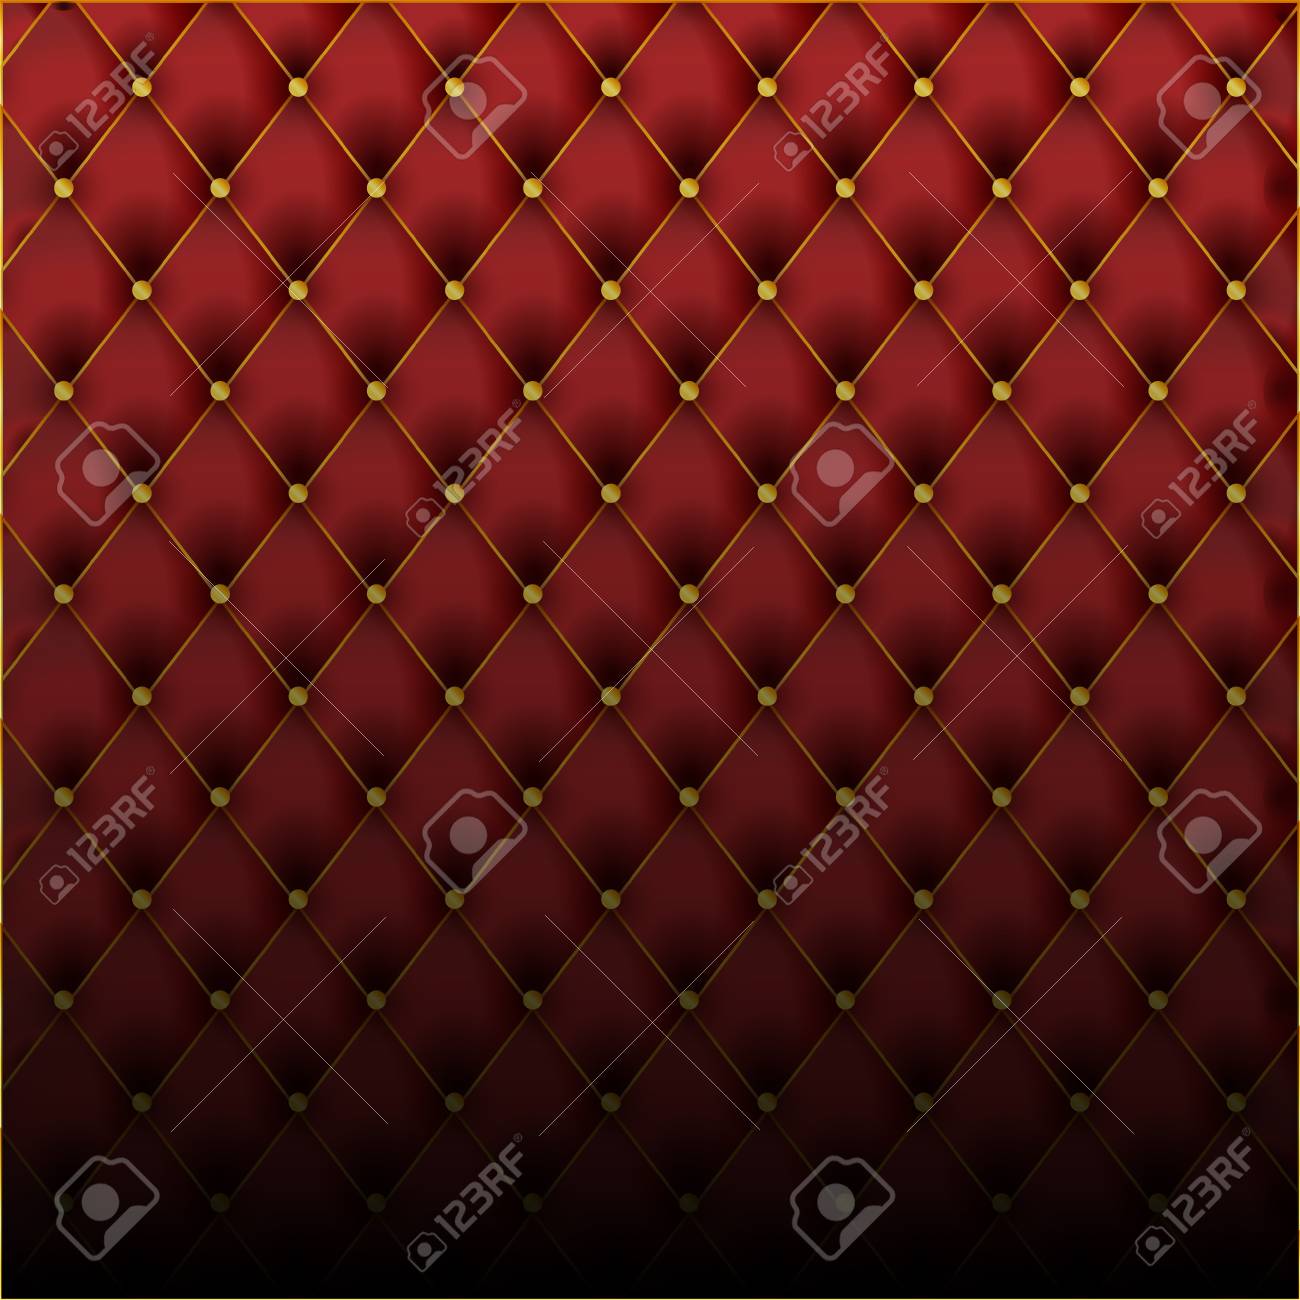 Leather Texture Luxury Black Background Pattern Material